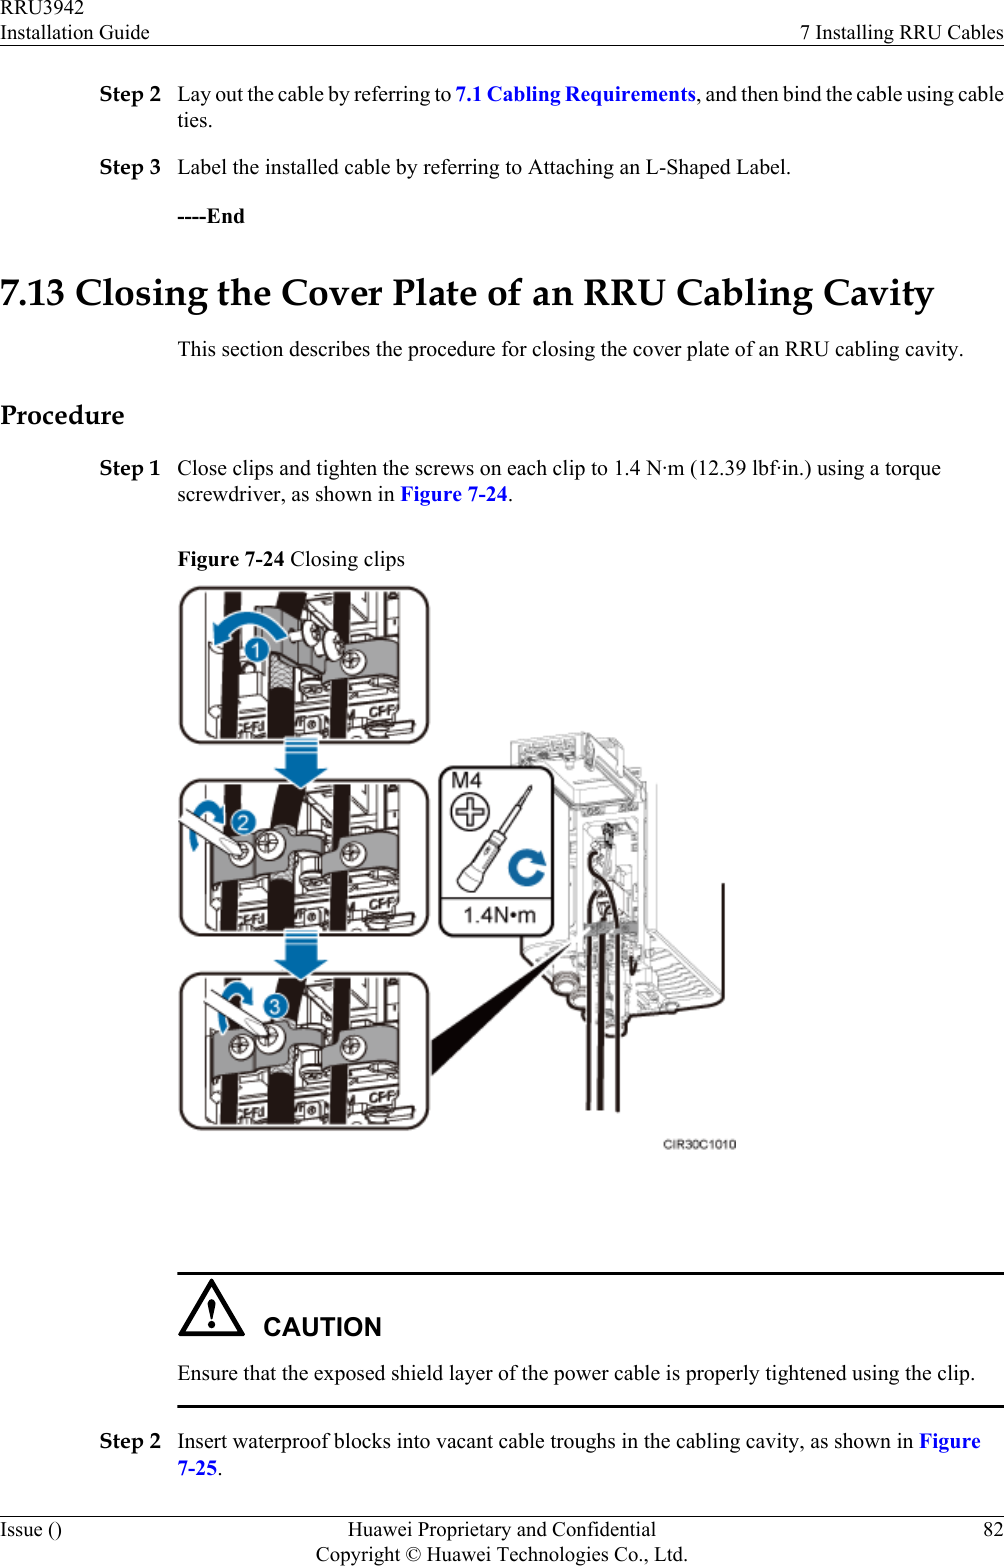 Step 2 Lay out the cable by referring to 7.1 Cabling Requirements, and then bind the cable using cableties.Step 3 Label the installed cable by referring to Attaching an L-Shaped Label.----End7.13 Closing the Cover Plate of an RRU Cabling CavityThis section describes the procedure for closing the cover plate of an RRU cabling cavity.ProcedureStep 1 Close clips and tighten the screws on each clip to 1.4 N·m (12.39 lbf·in.) using a torquescrewdriver, as shown in Figure 7-24.Figure 7-24 Closing clips CAUTIONEnsure that the exposed shield layer of the power cable is properly tightened using the clip.Step 2 Insert waterproof blocks into vacant cable troughs in the cabling cavity, as shown in Figure7-25.RRU3942Installation Guide 7 Installing RRU CablesIssue () Huawei Proprietary and ConfidentialCopyright © Huawei Technologies Co., Ltd.82